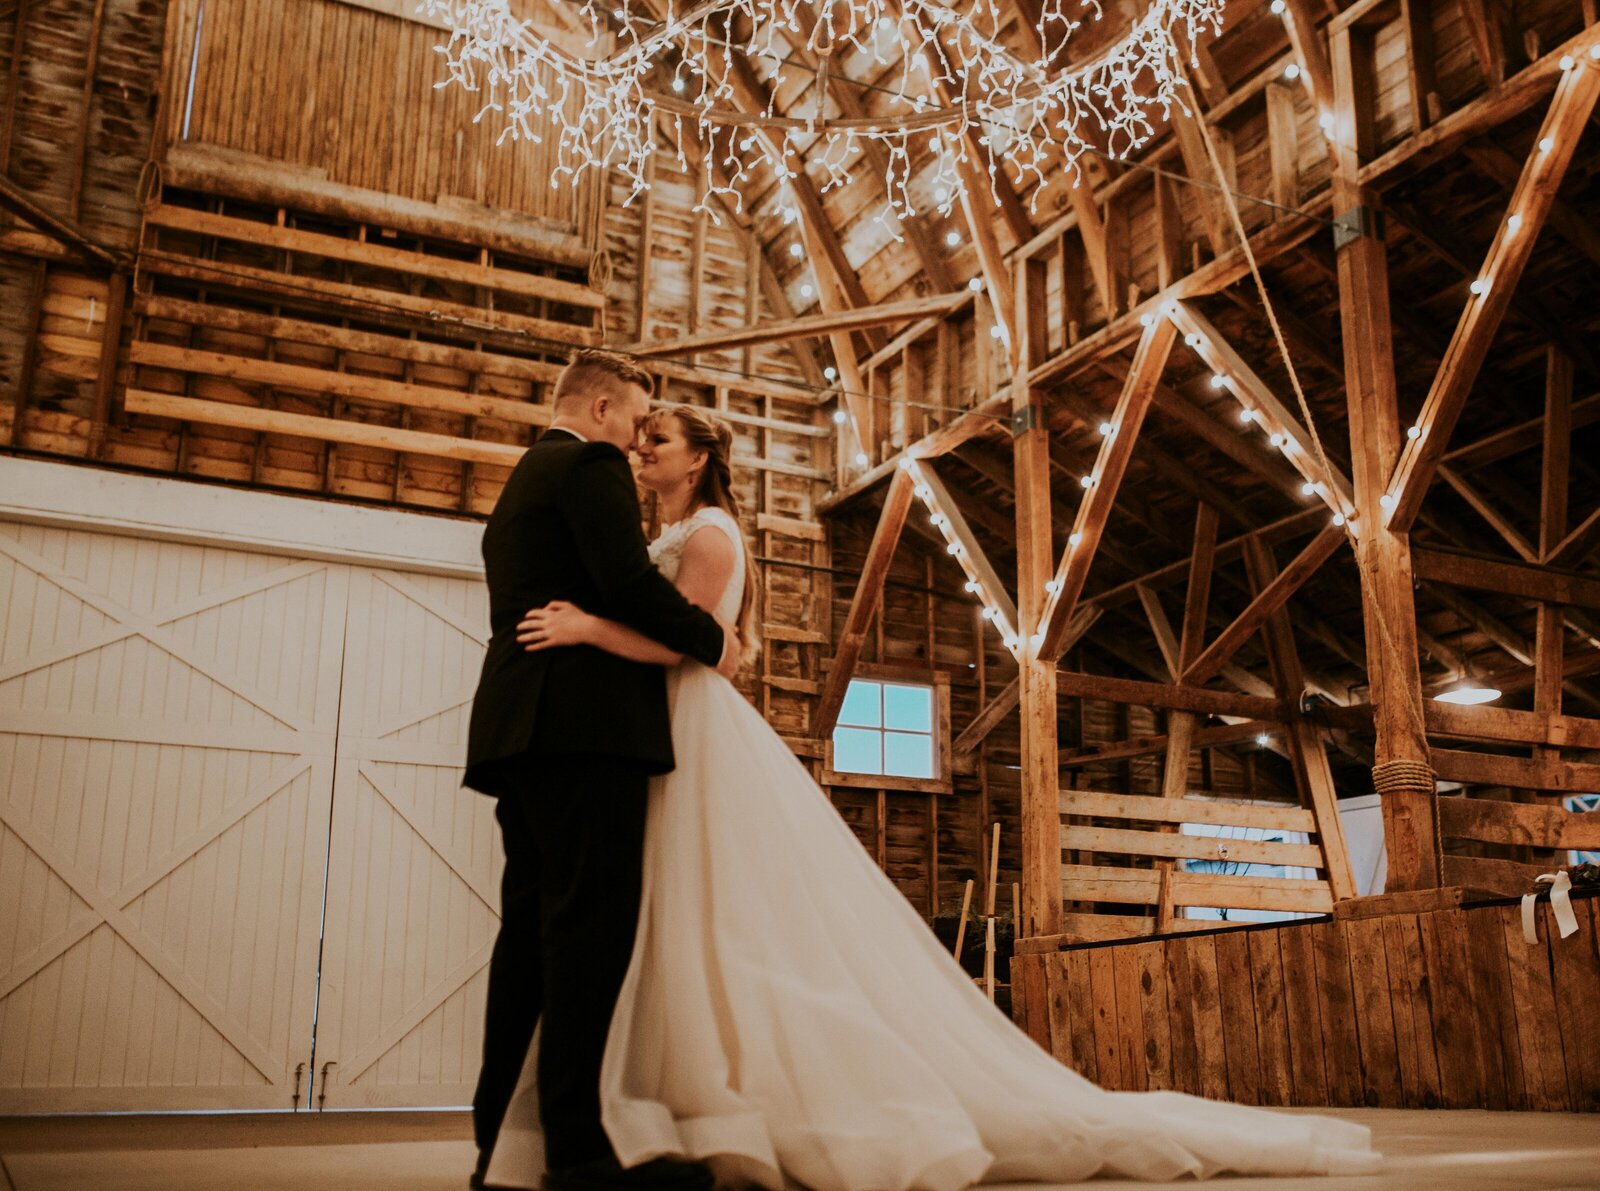 romantic barn with fairy lights and a bride and groom dancing alone together